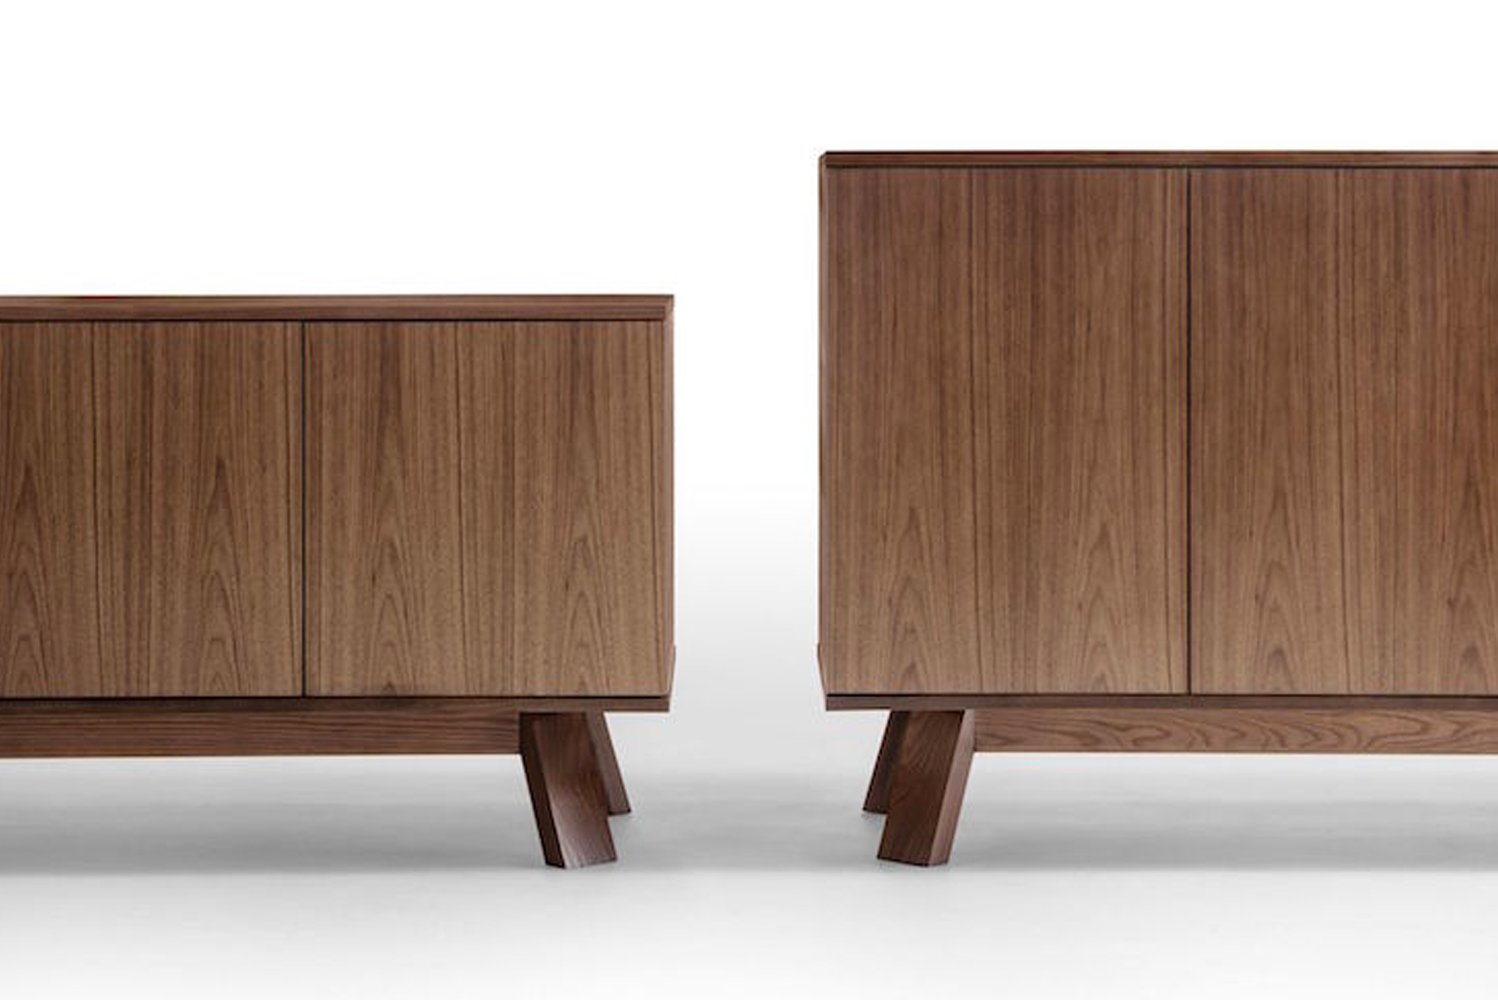 Introducing Saranac the latest collection by Mitchell Bakker of IDa Design for office furniture manufacturer Gunlocke 